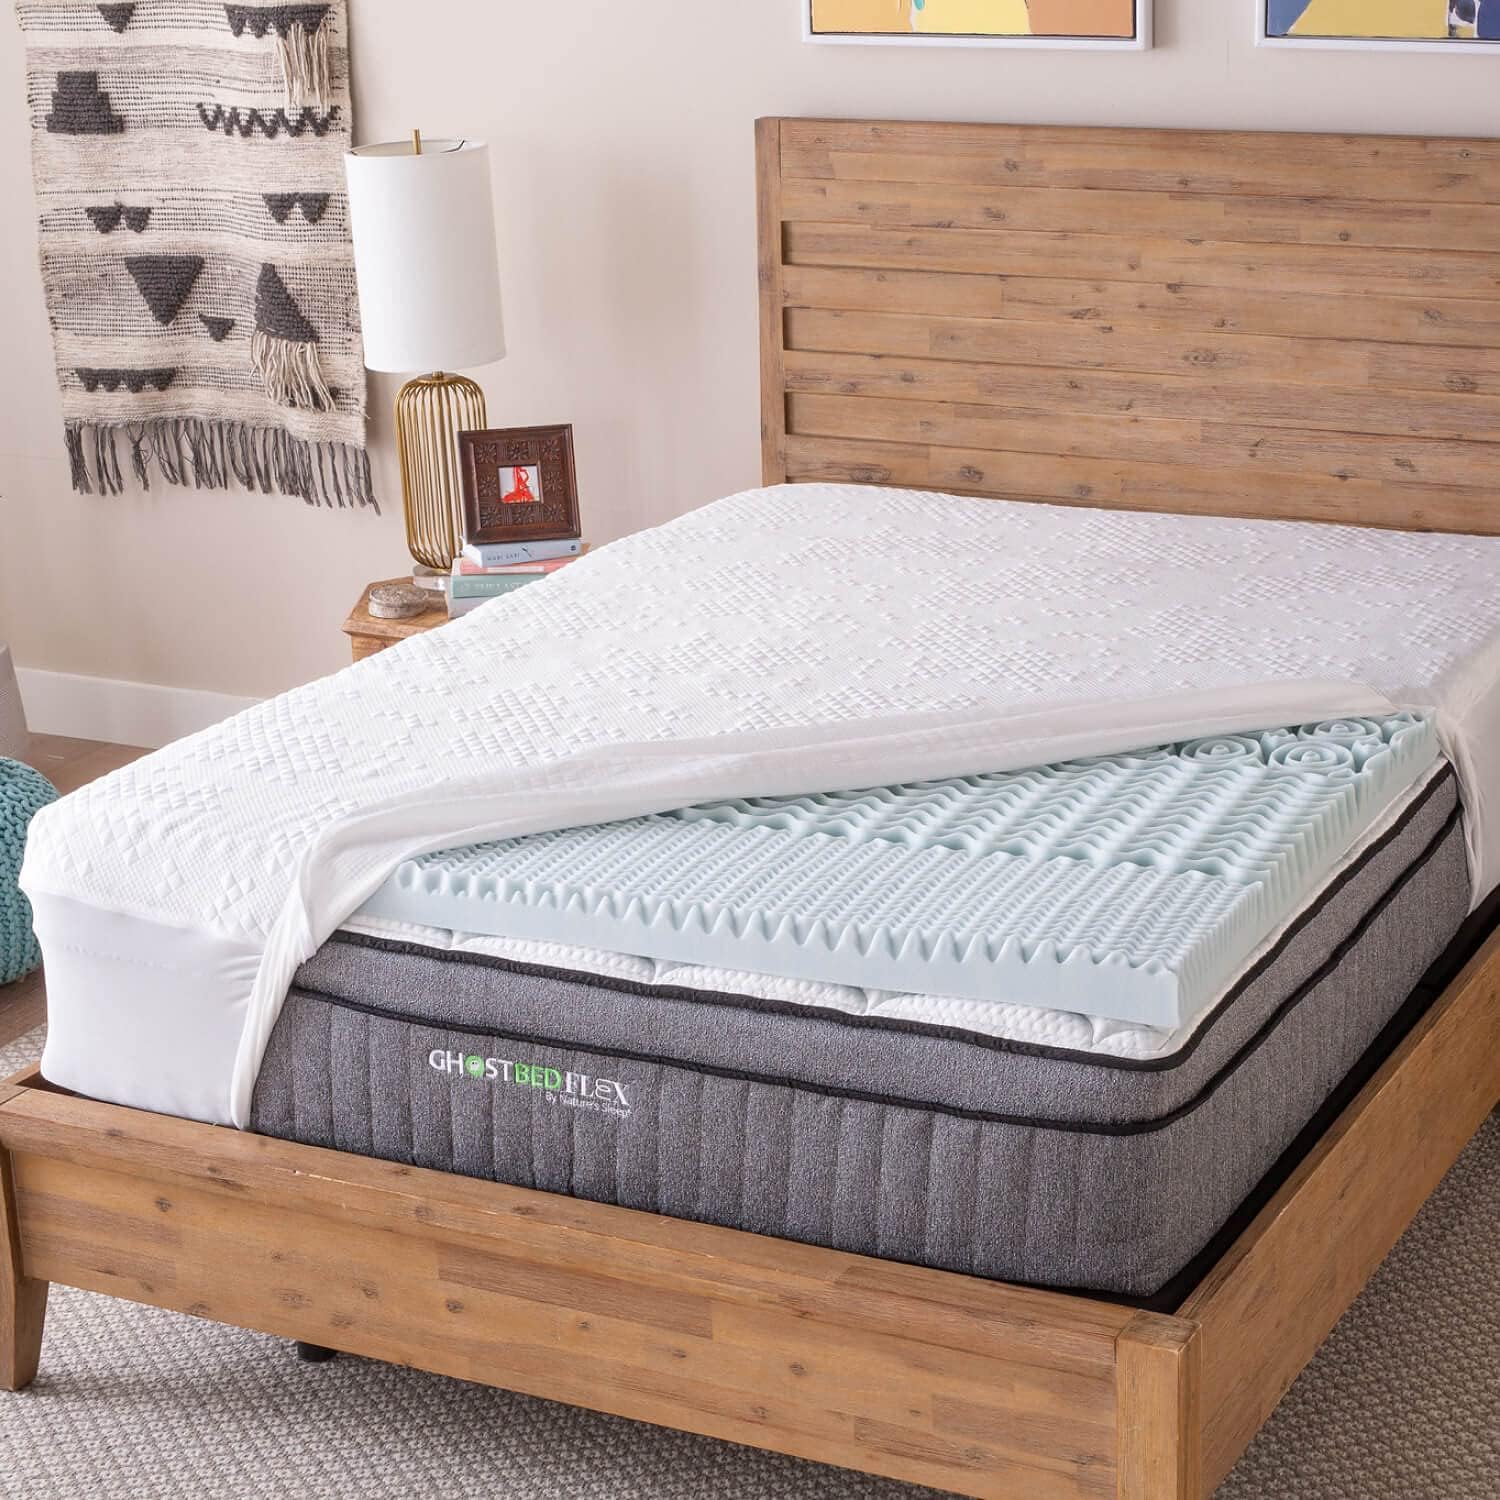 GhostBed Mattress Topper Review – Is it Worth the Money?